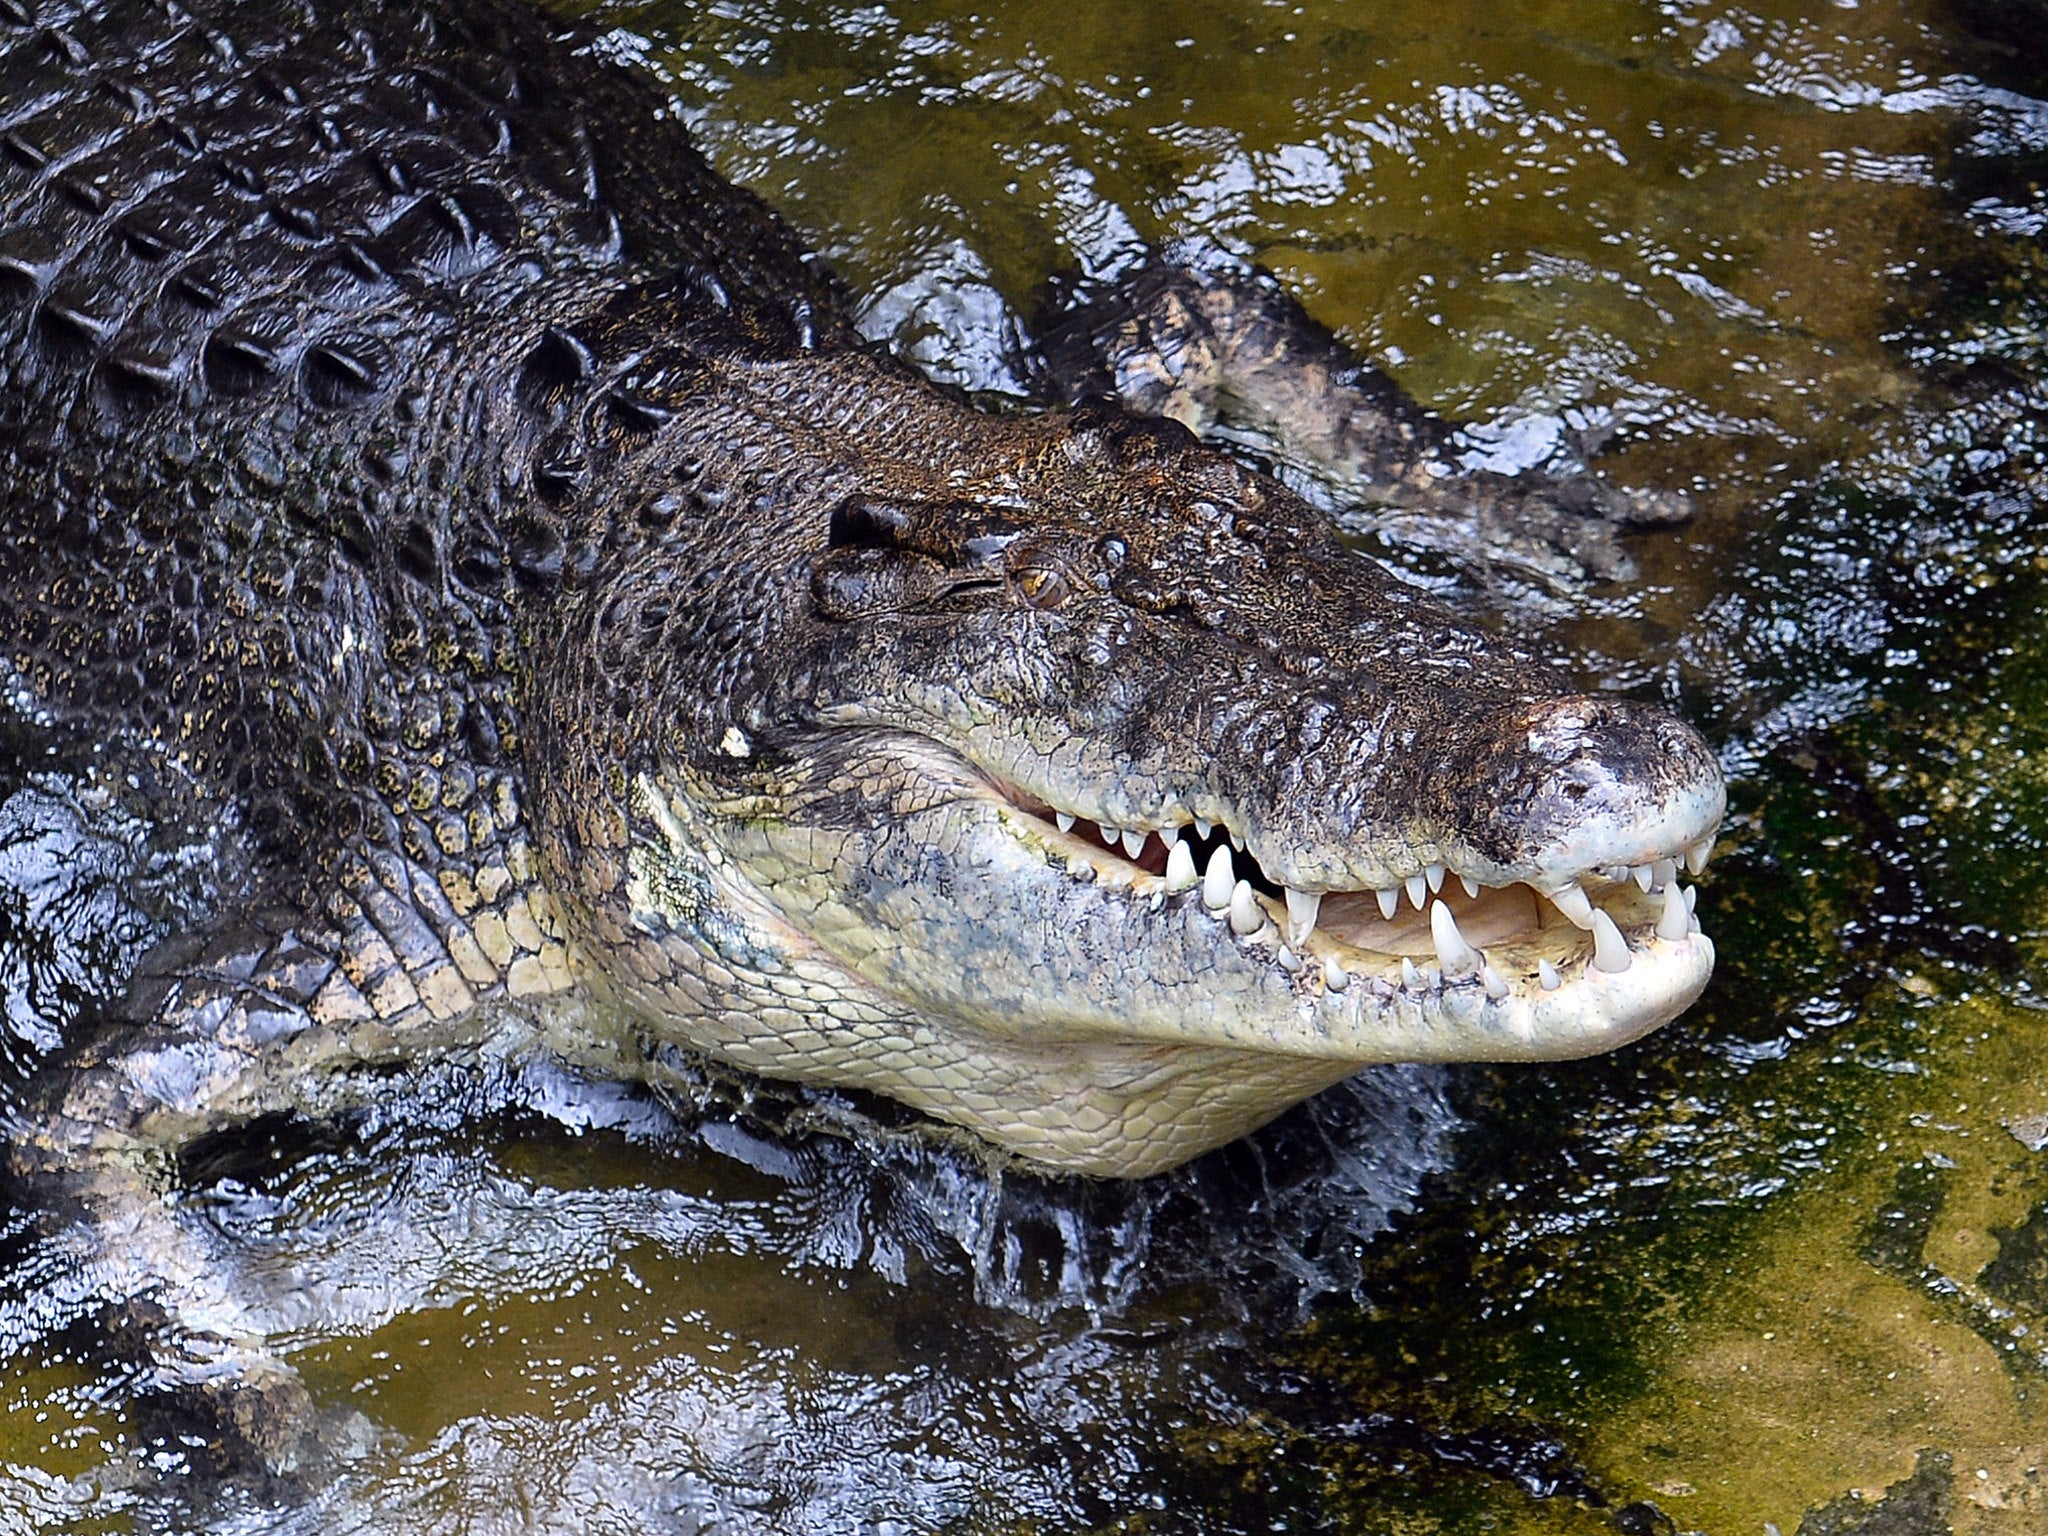 The Endeavour River is known for its high number of crocodiles